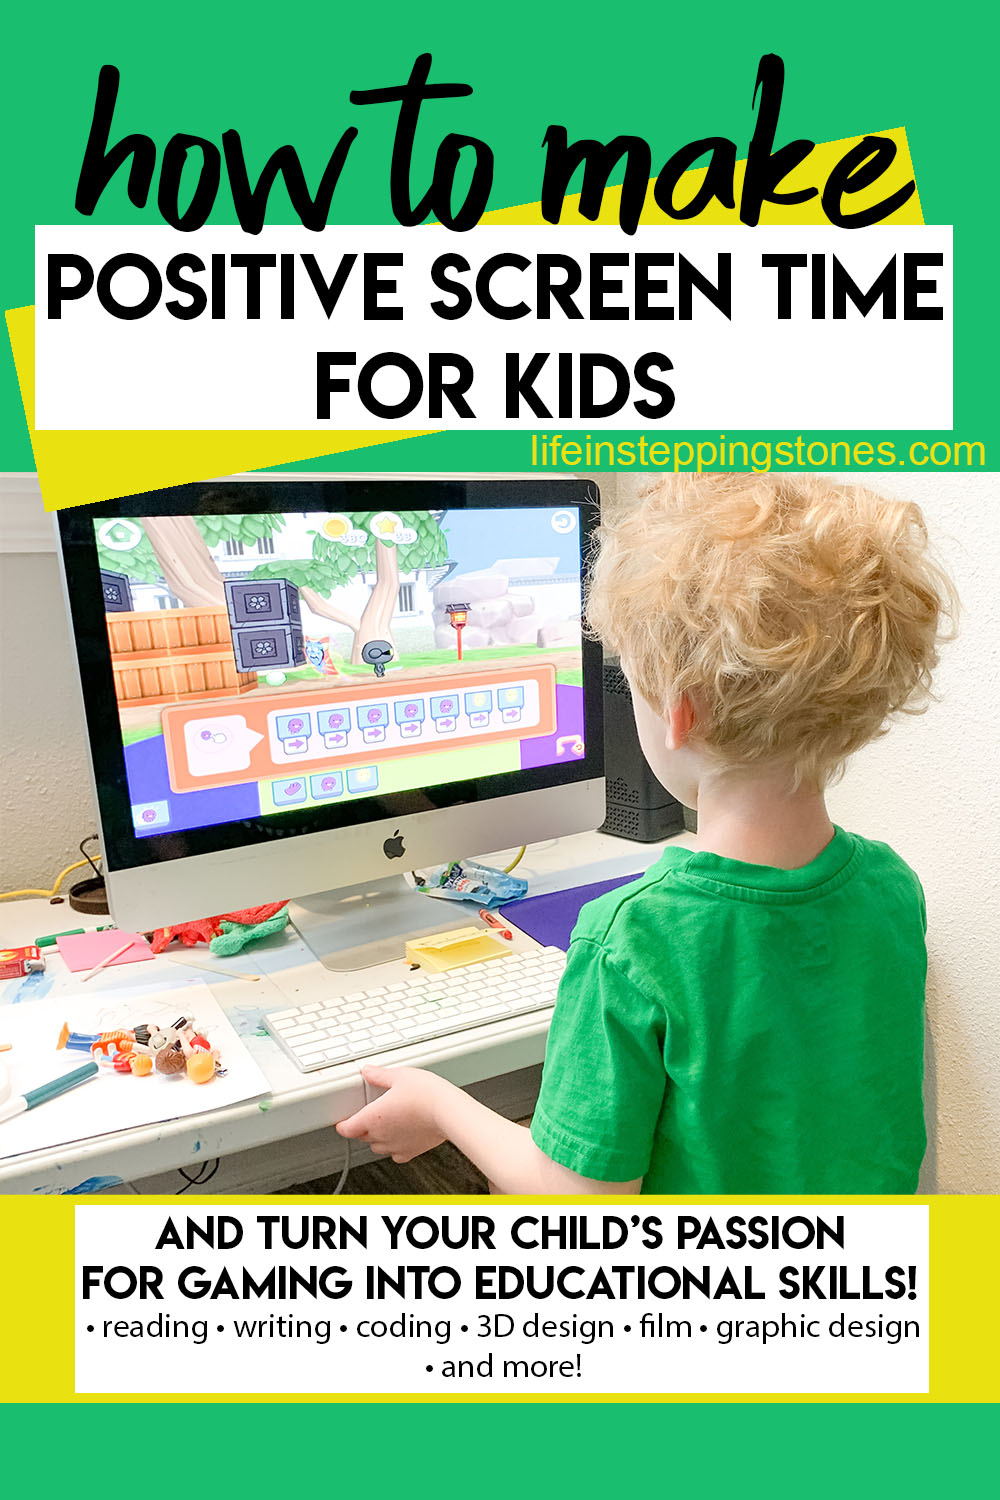 Are you feeling mom guilt over how much screen time your child gets? Are you constantly wondering what the negative impact of screen time is on your child? Don't feel guilty anymore. Find out all of the ways to make a positive screen time learning experience for your child, guilt free!